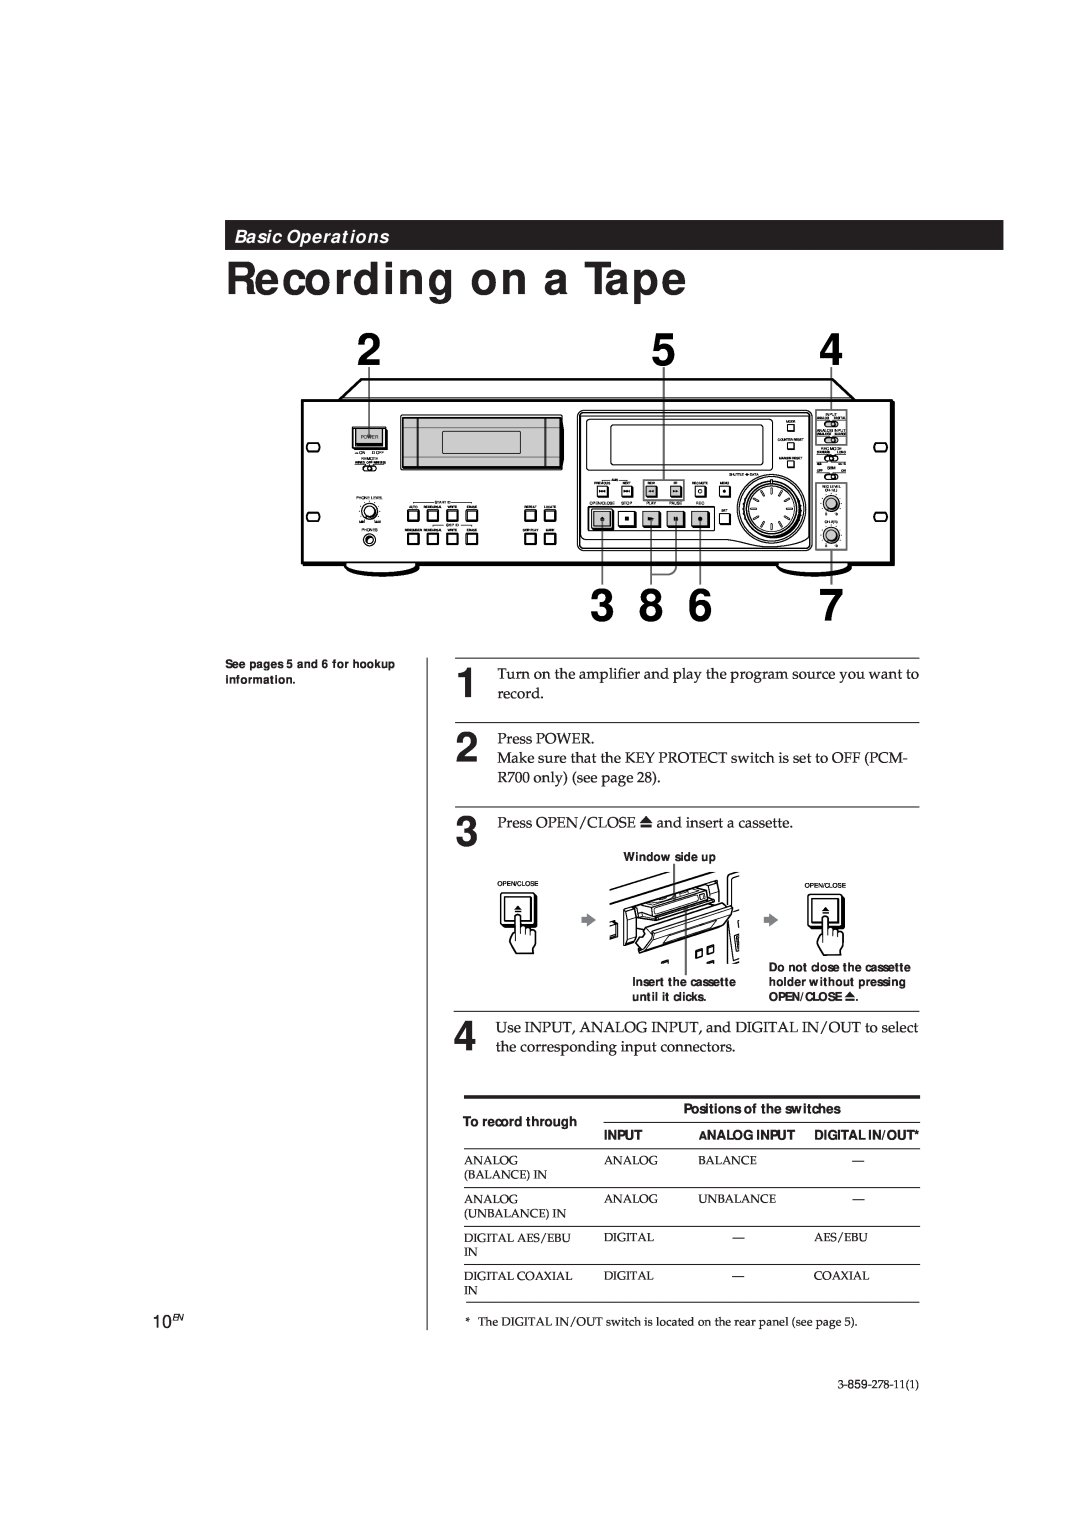 Sony PCM-R500 Recording on a Tape, Basic Operations, 10EN, See pages 5 and 6 for hookup information, To record through 